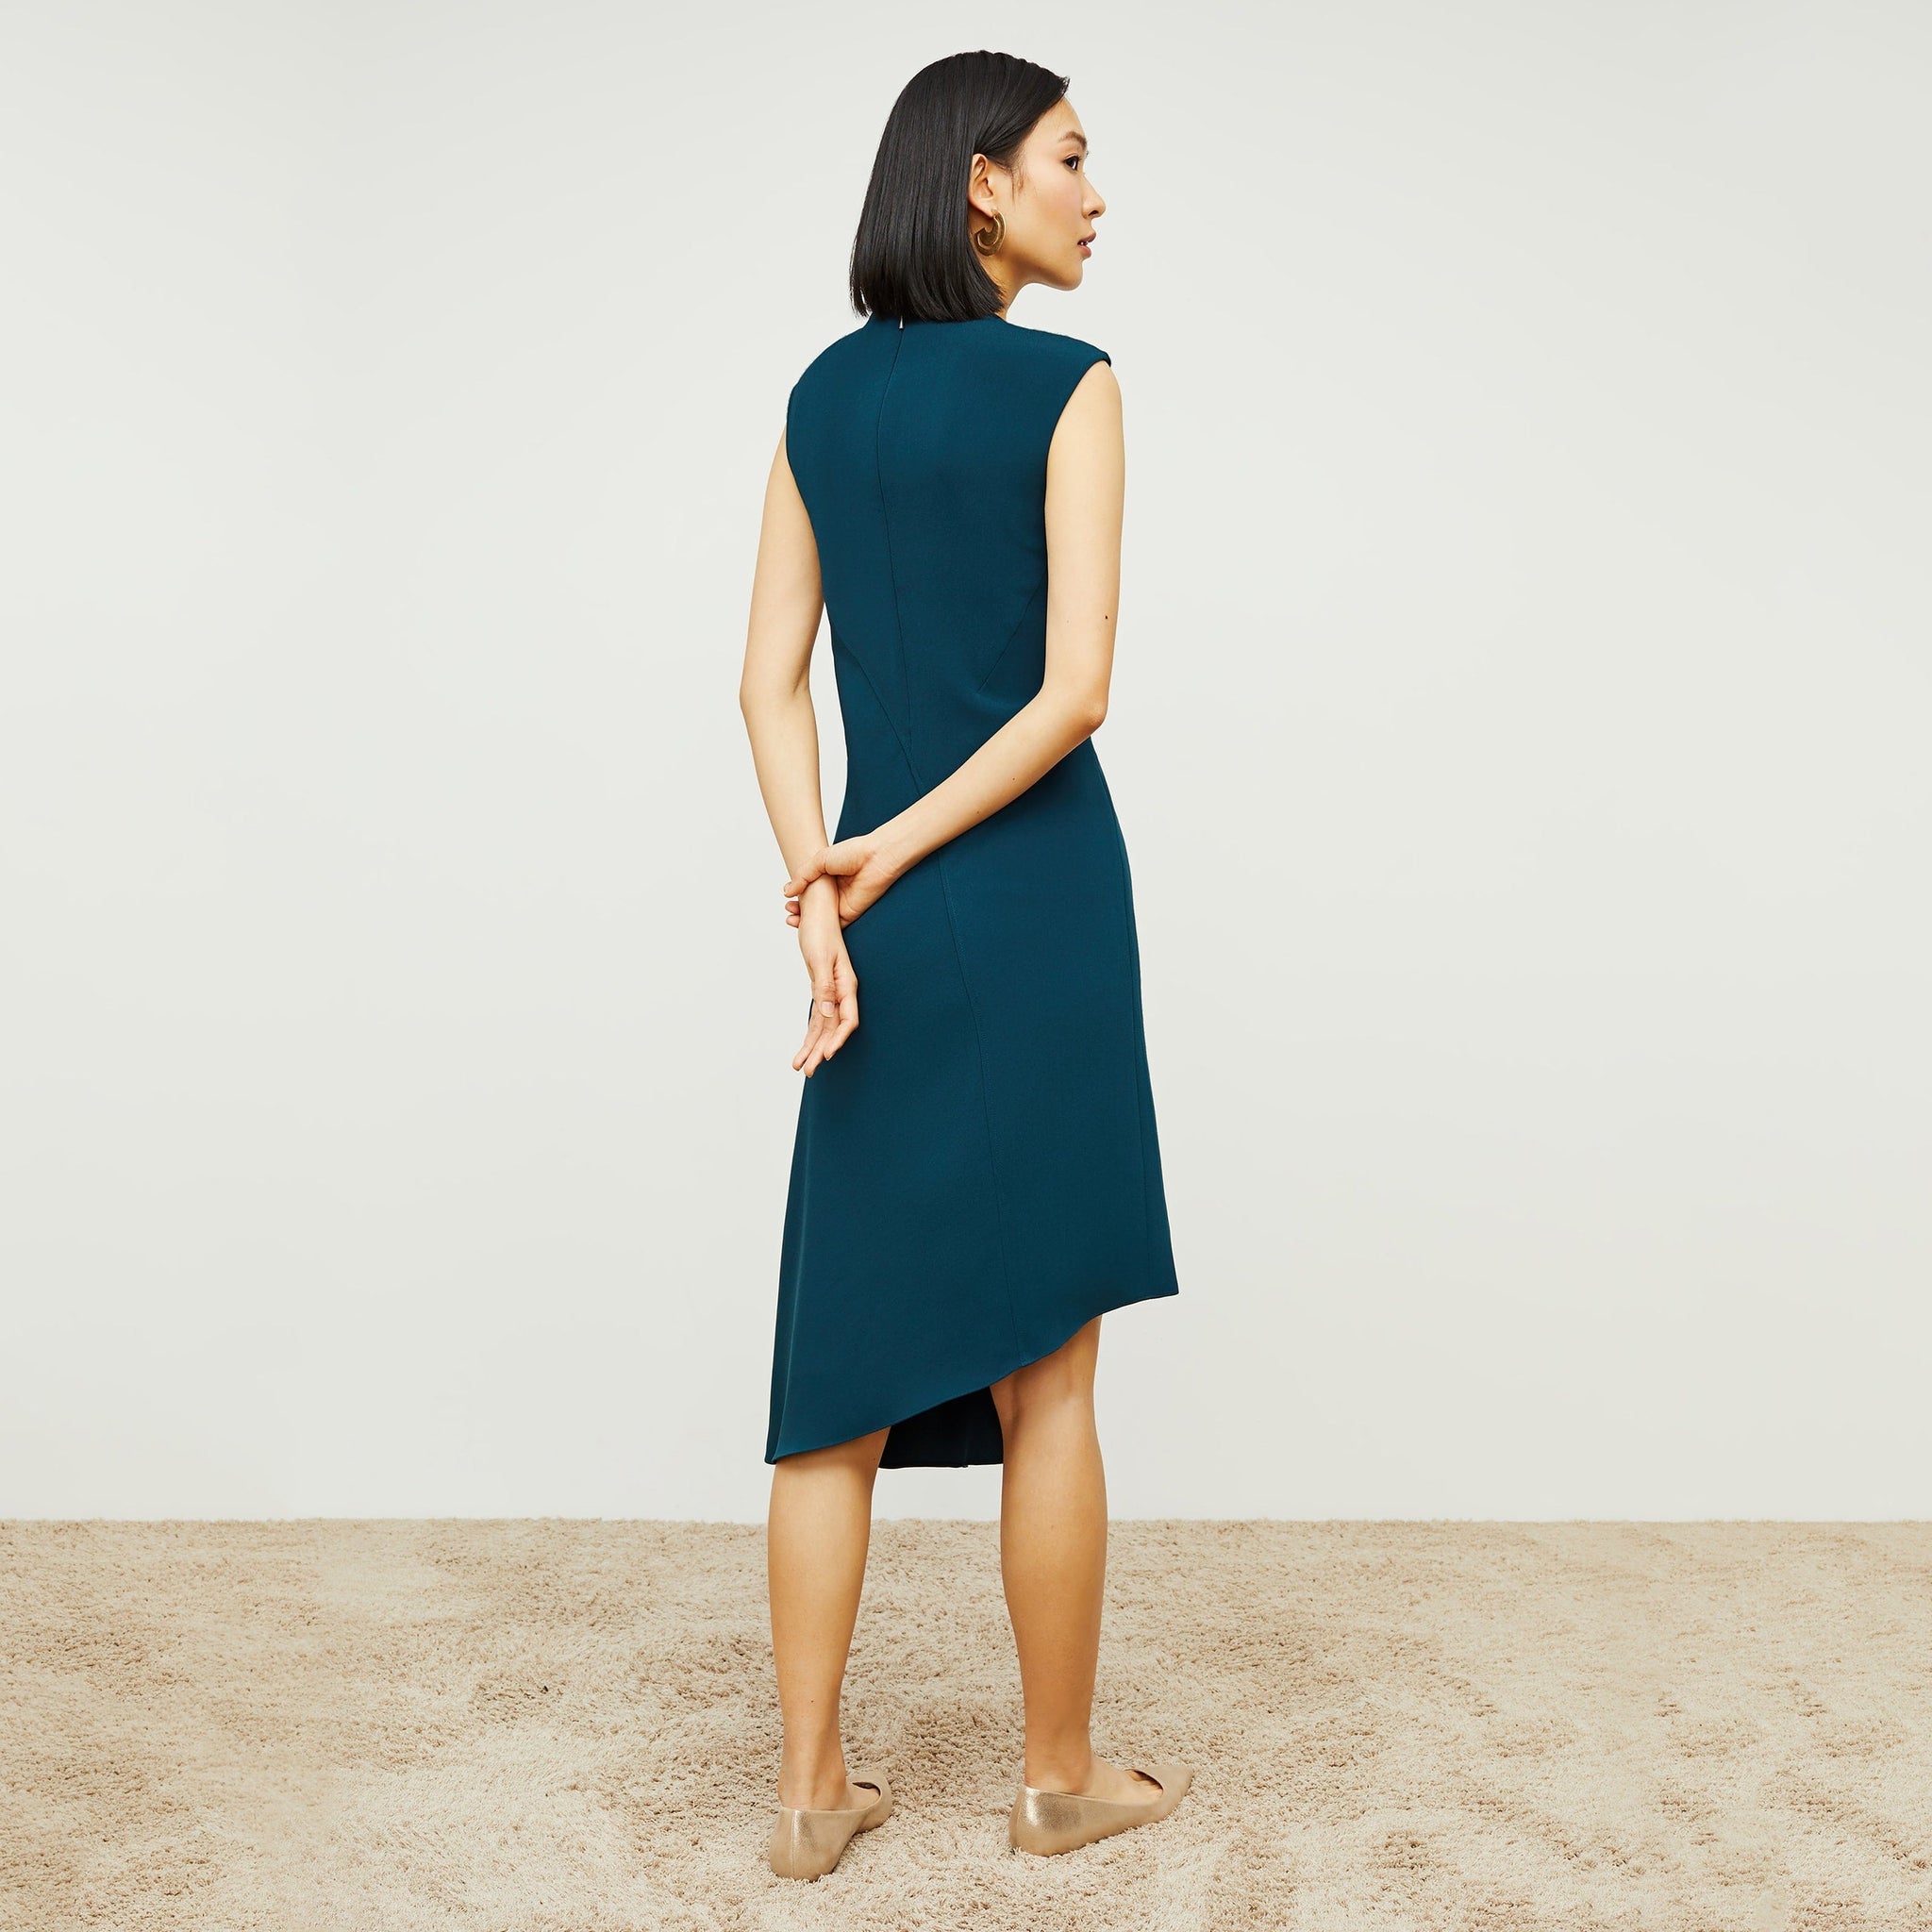 Back image of a woman standing wearing the Lara Dress in Rainforest